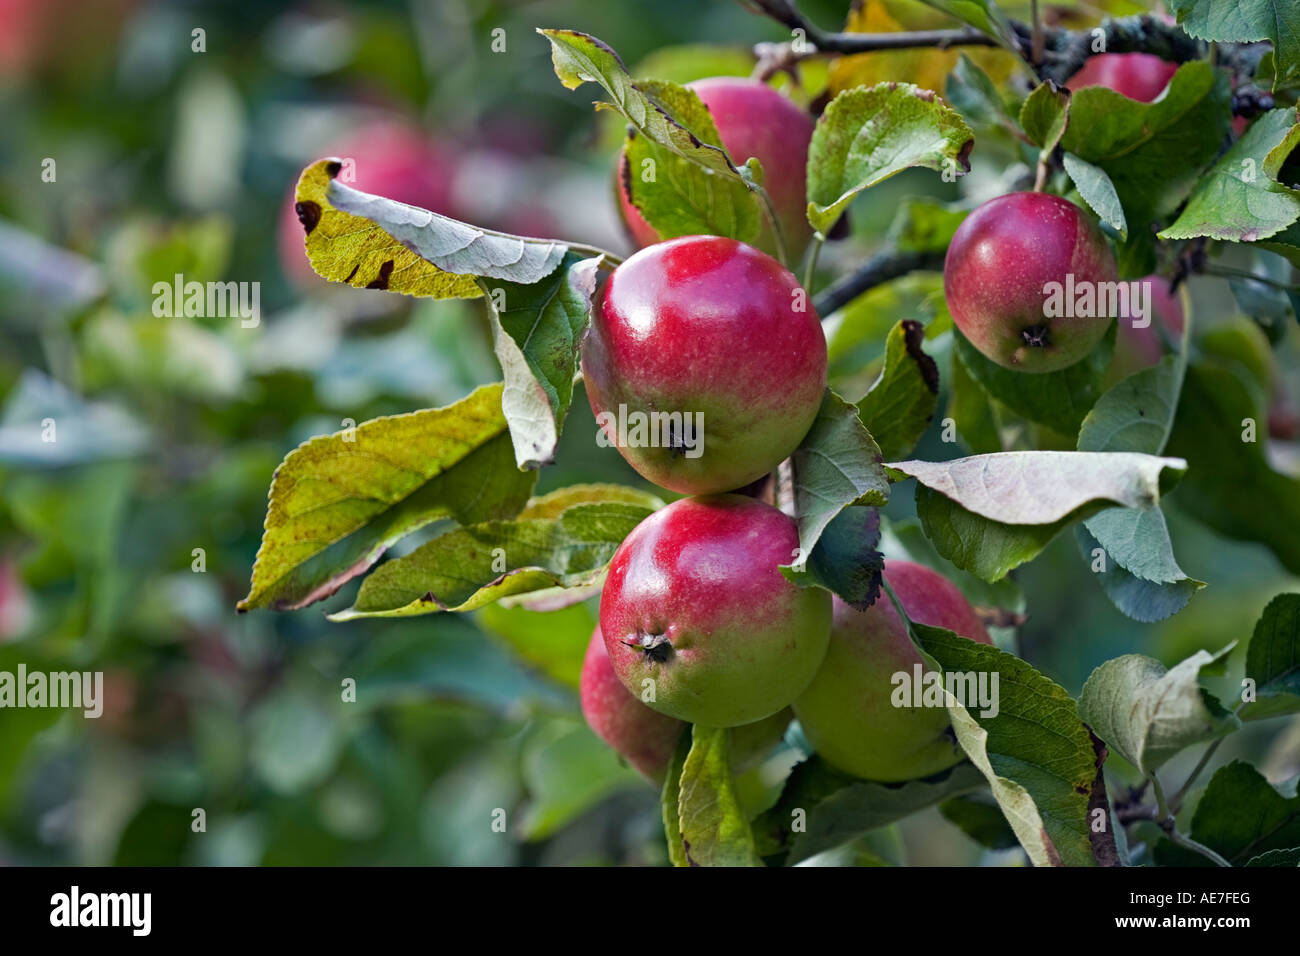 Eating apples variety 'Discovery' ripening on the tree in an English orchard Stock Photo